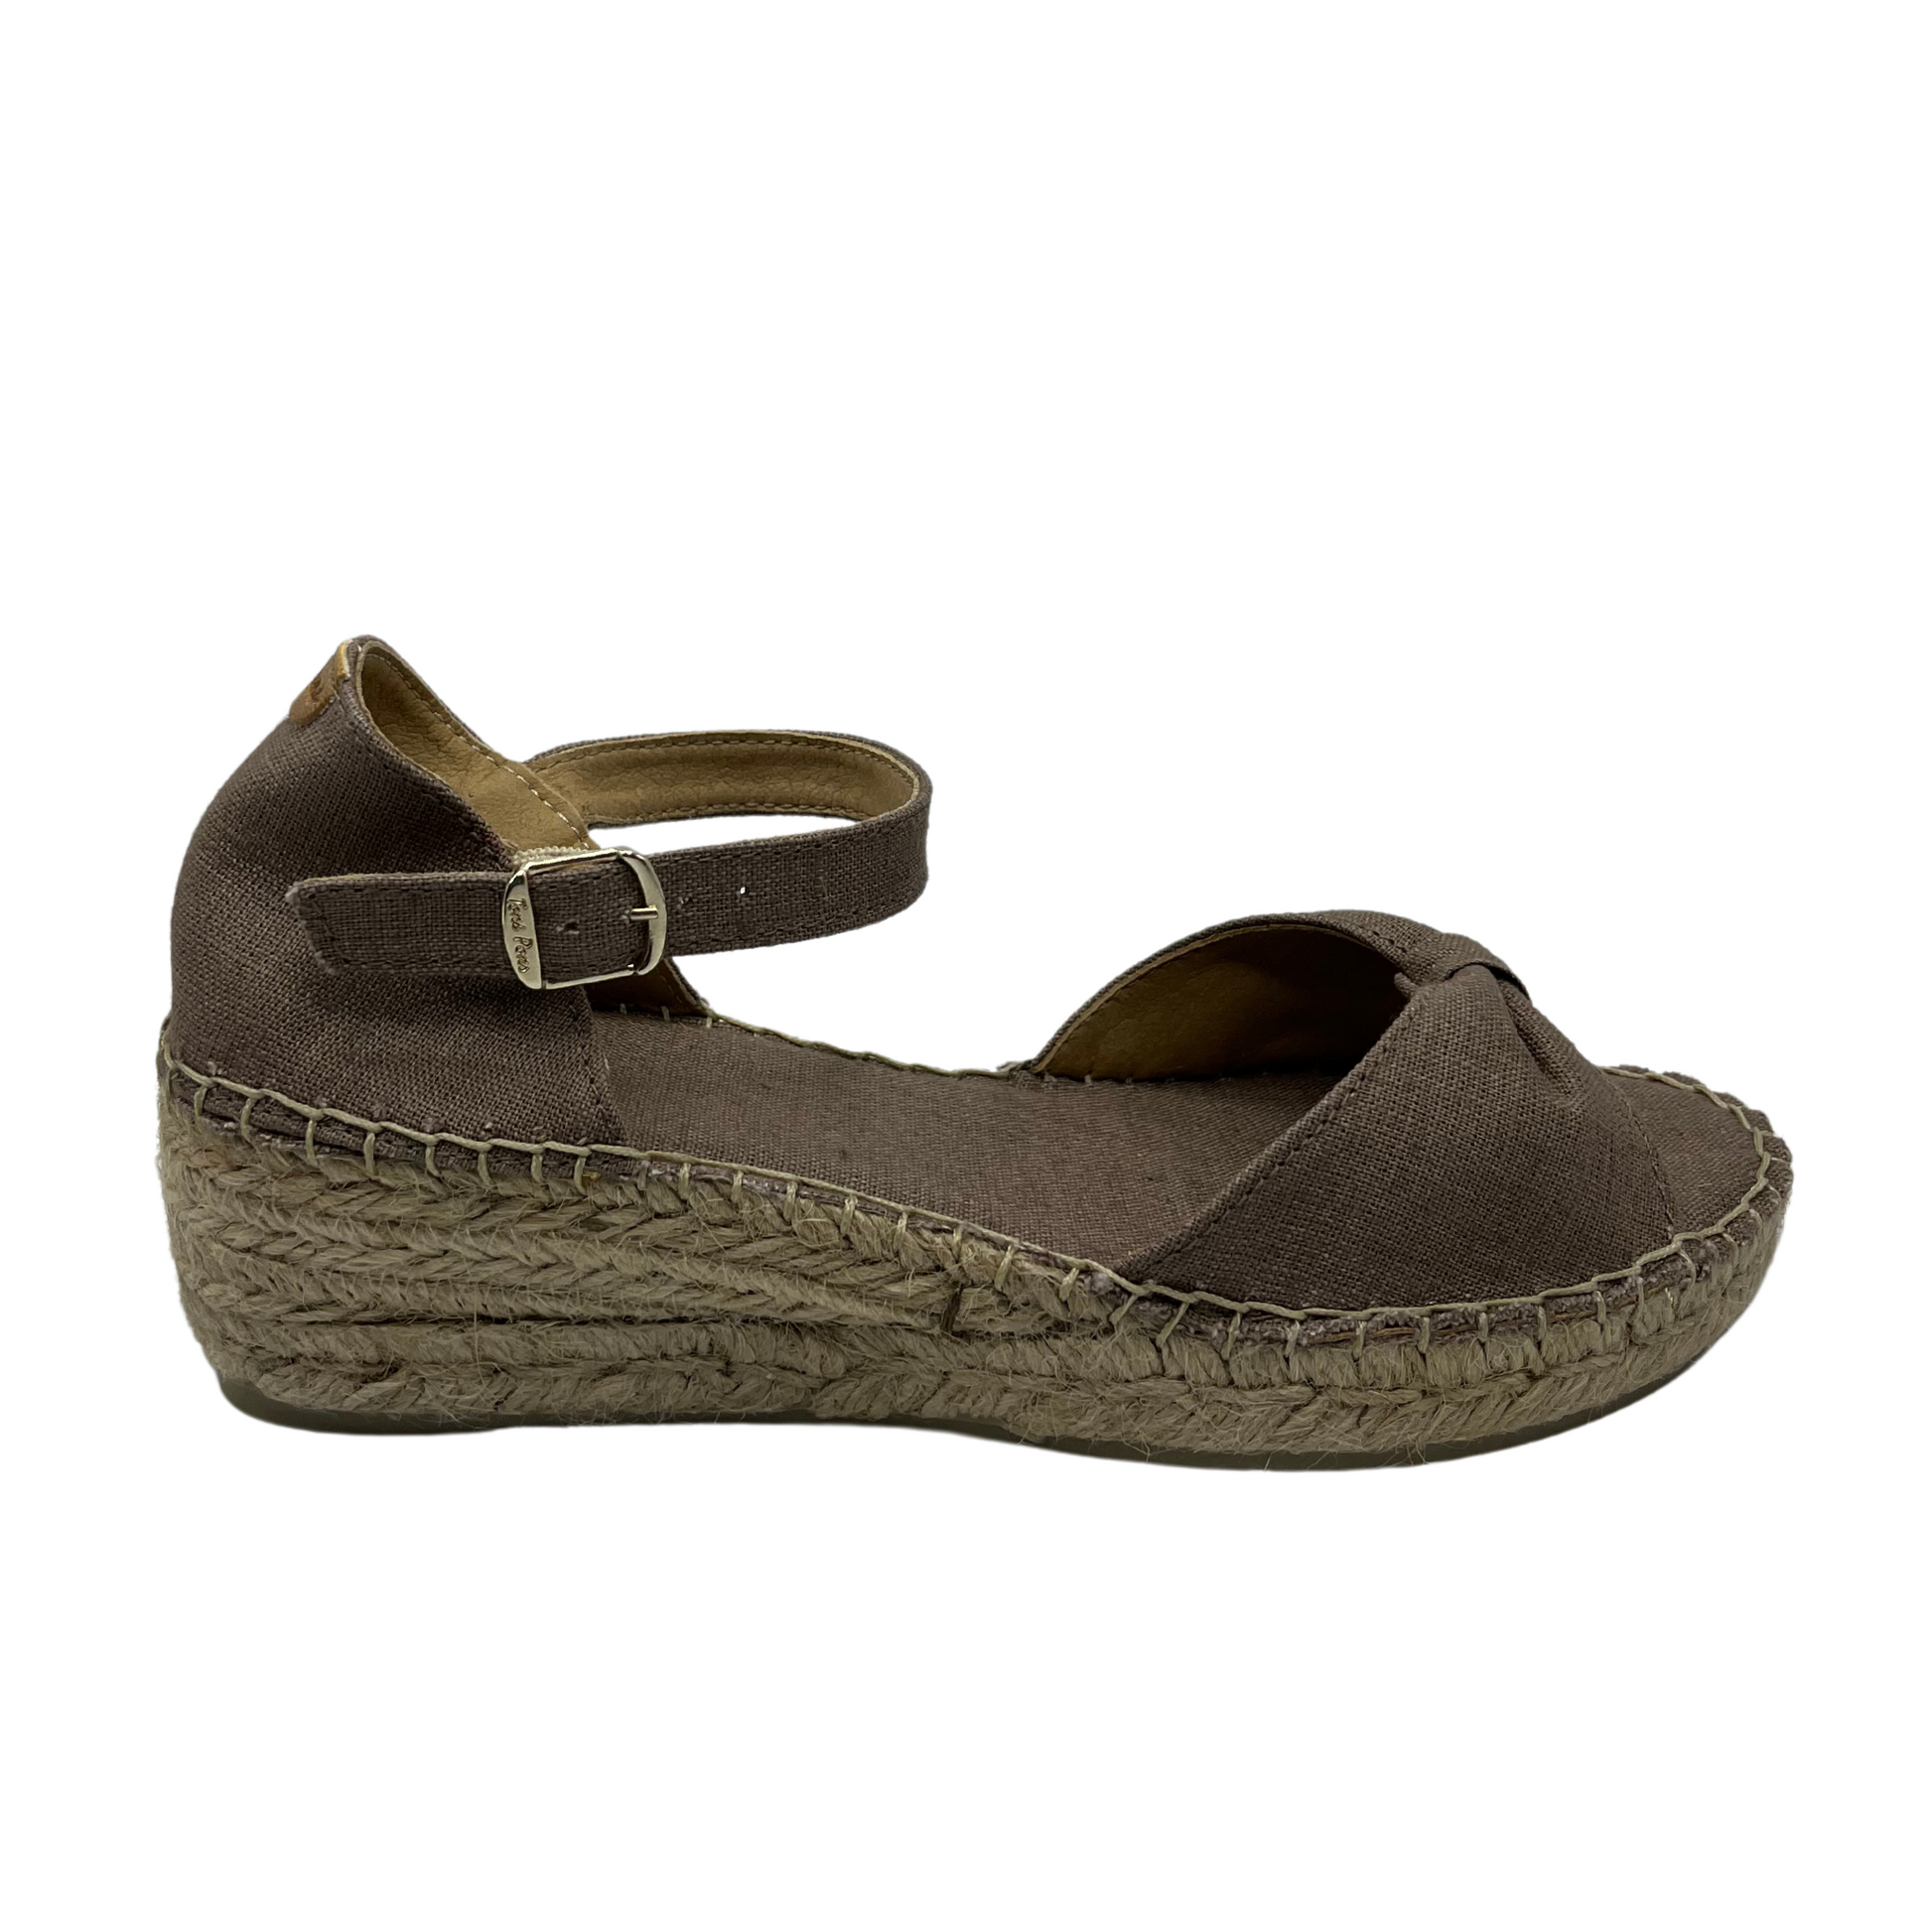 Right facing view of taupe wedge sandal with bow strap on toe and buckle ankle strap